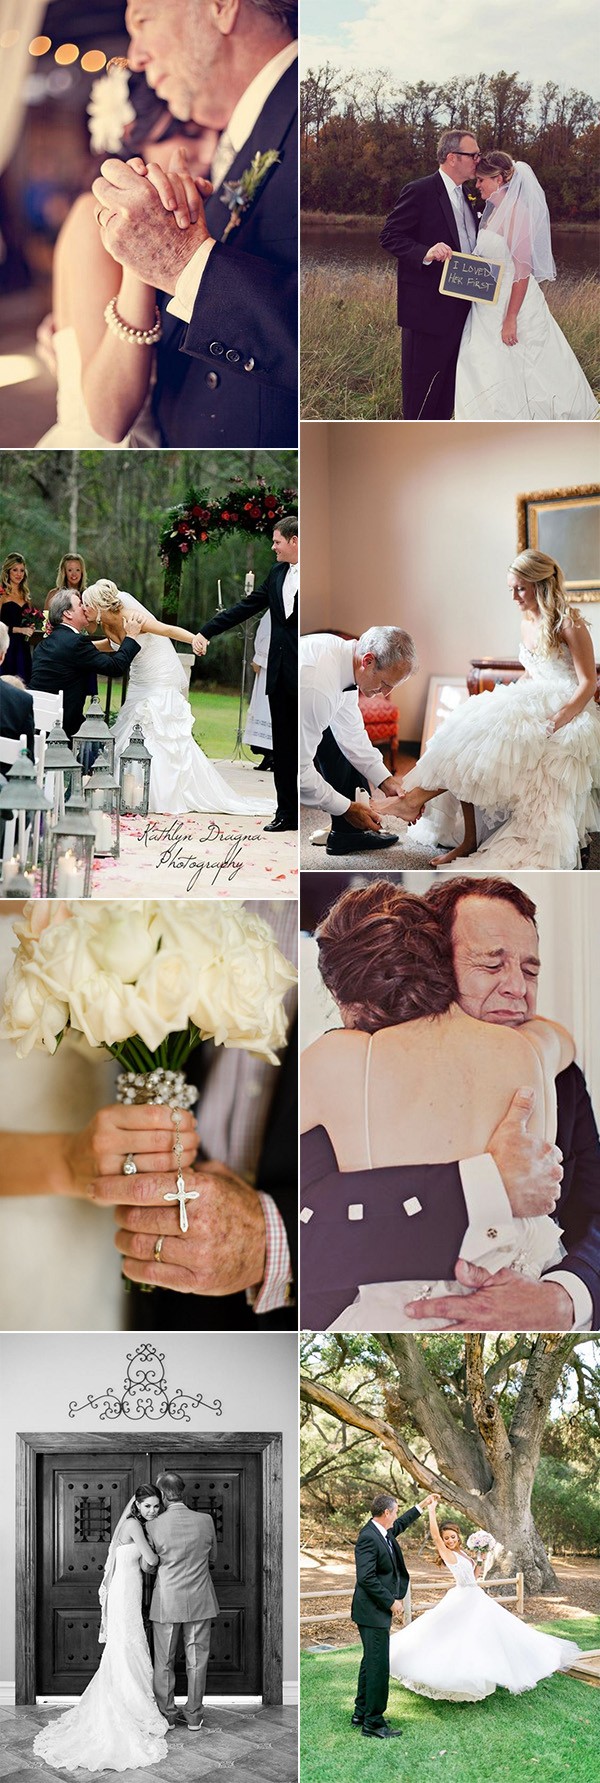 touching father daughter moments wedding photo ideas